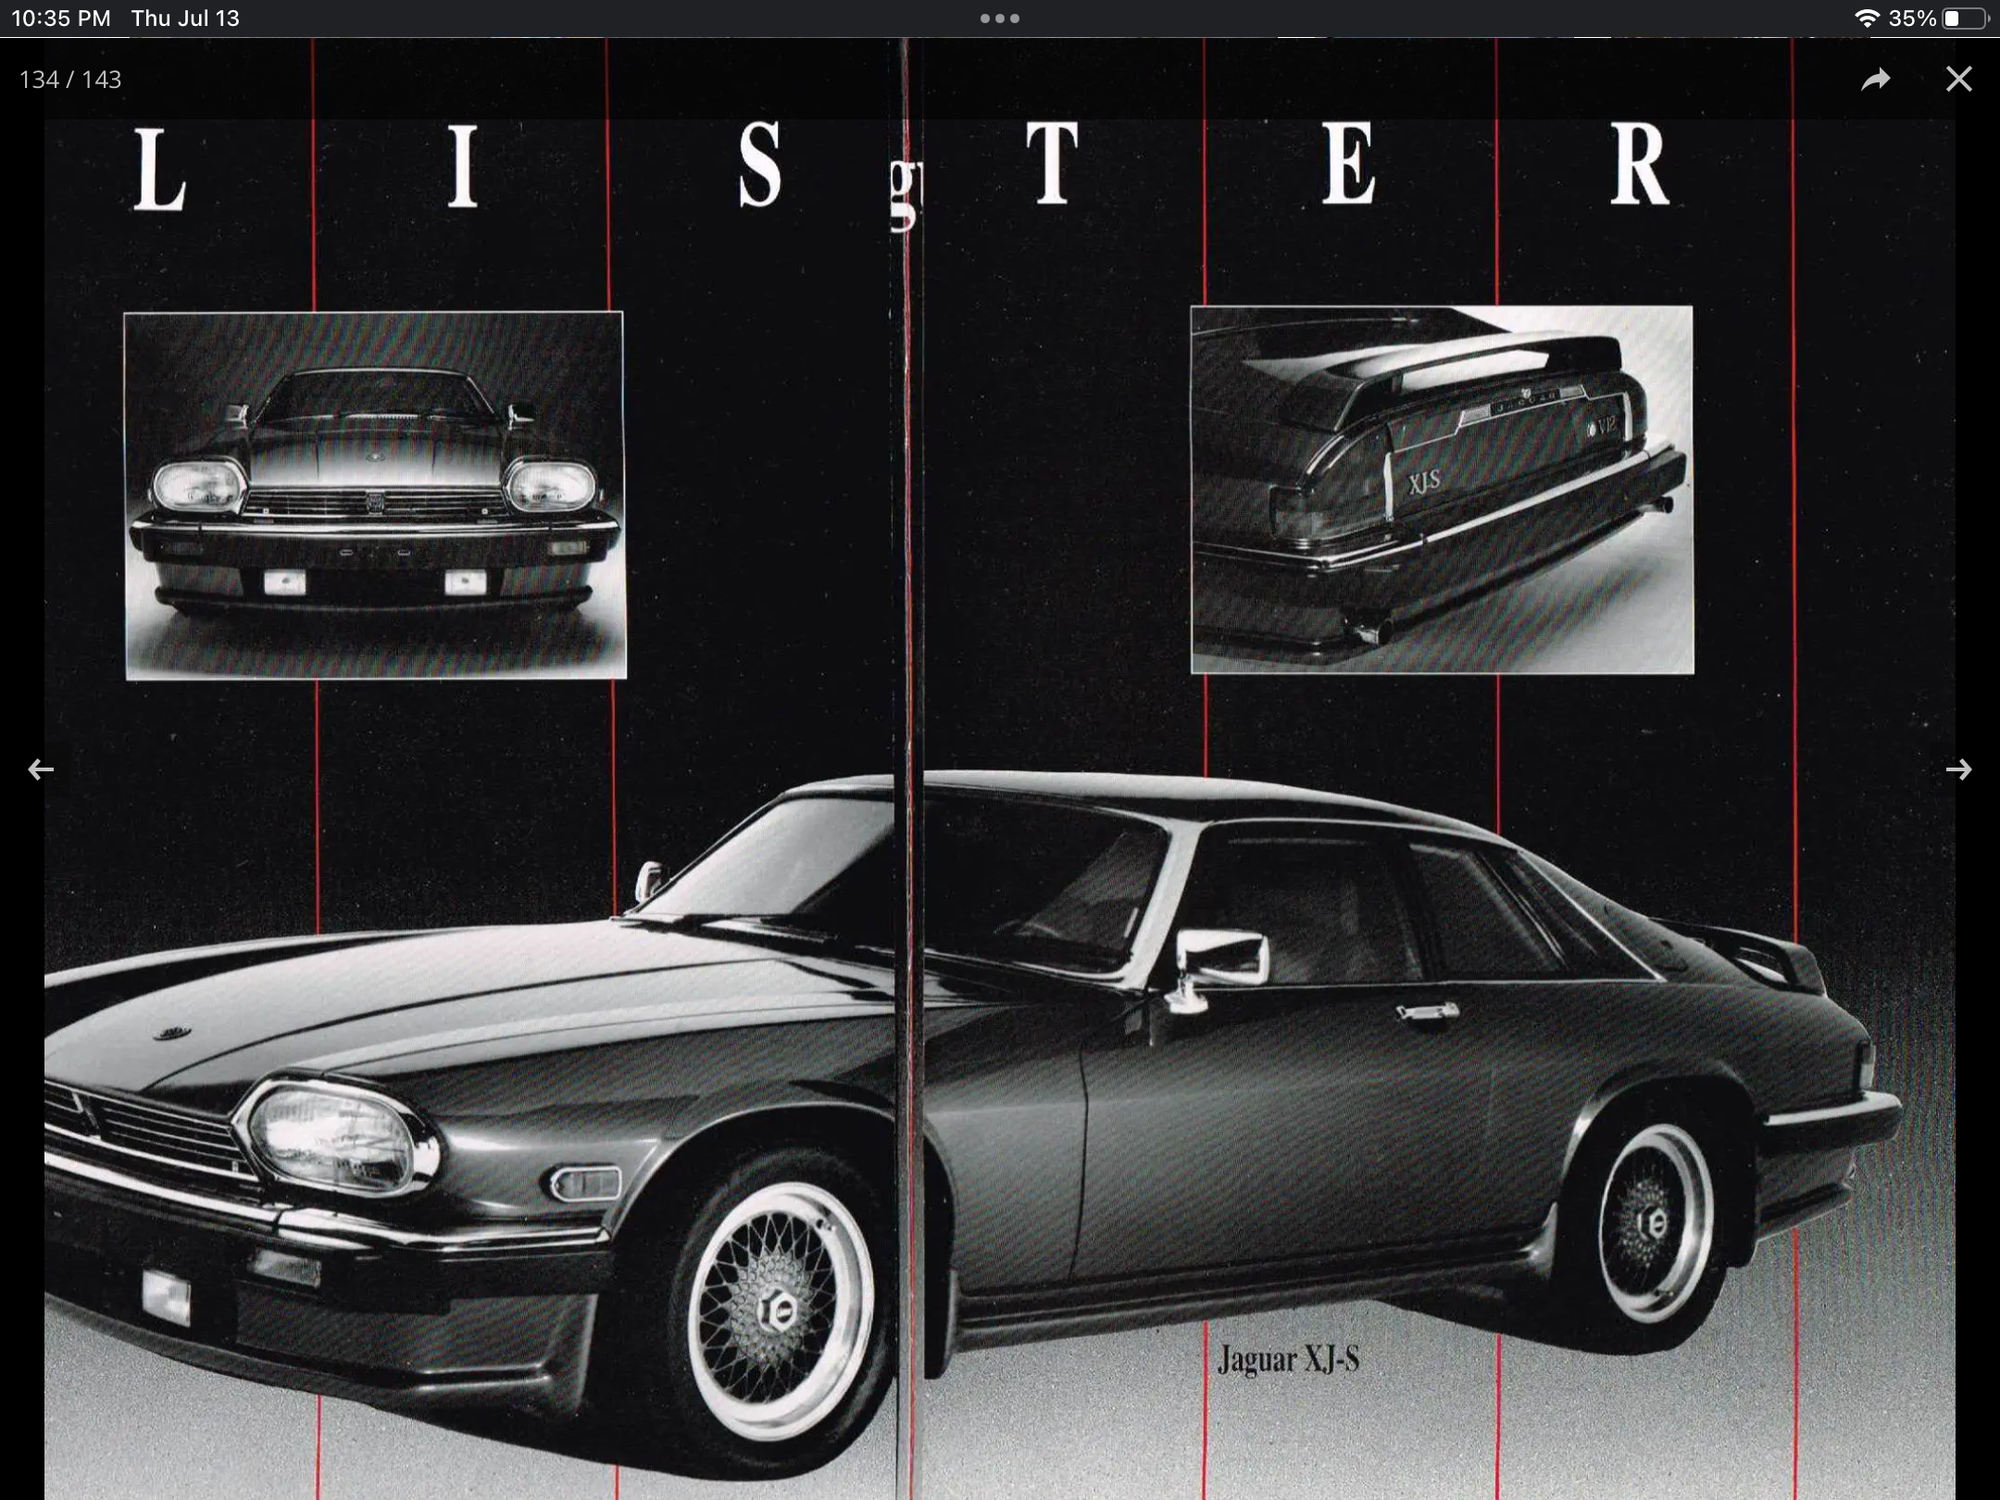 Accessories - Lister items….body kit, brochures, pretty much anything Lister - New or Used - 1984 to 1992 Jaguar XJS - Concord, NC 28025, United States